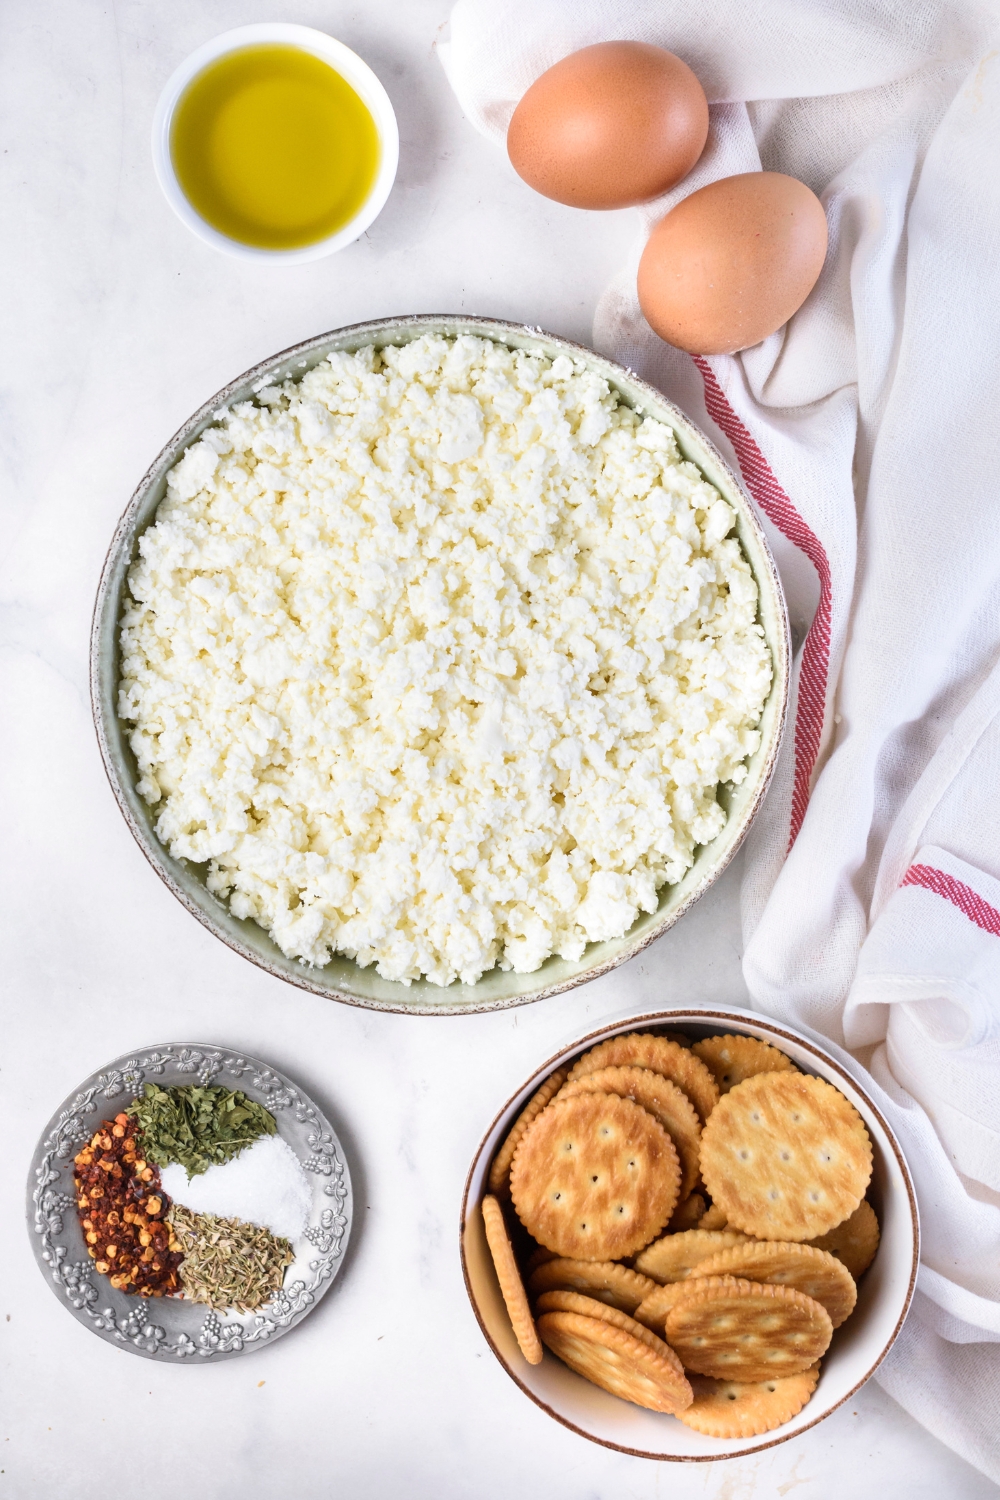 A countertop with ricotta cheese, crackers, seasonings and herbs, eggs, and olive oil.